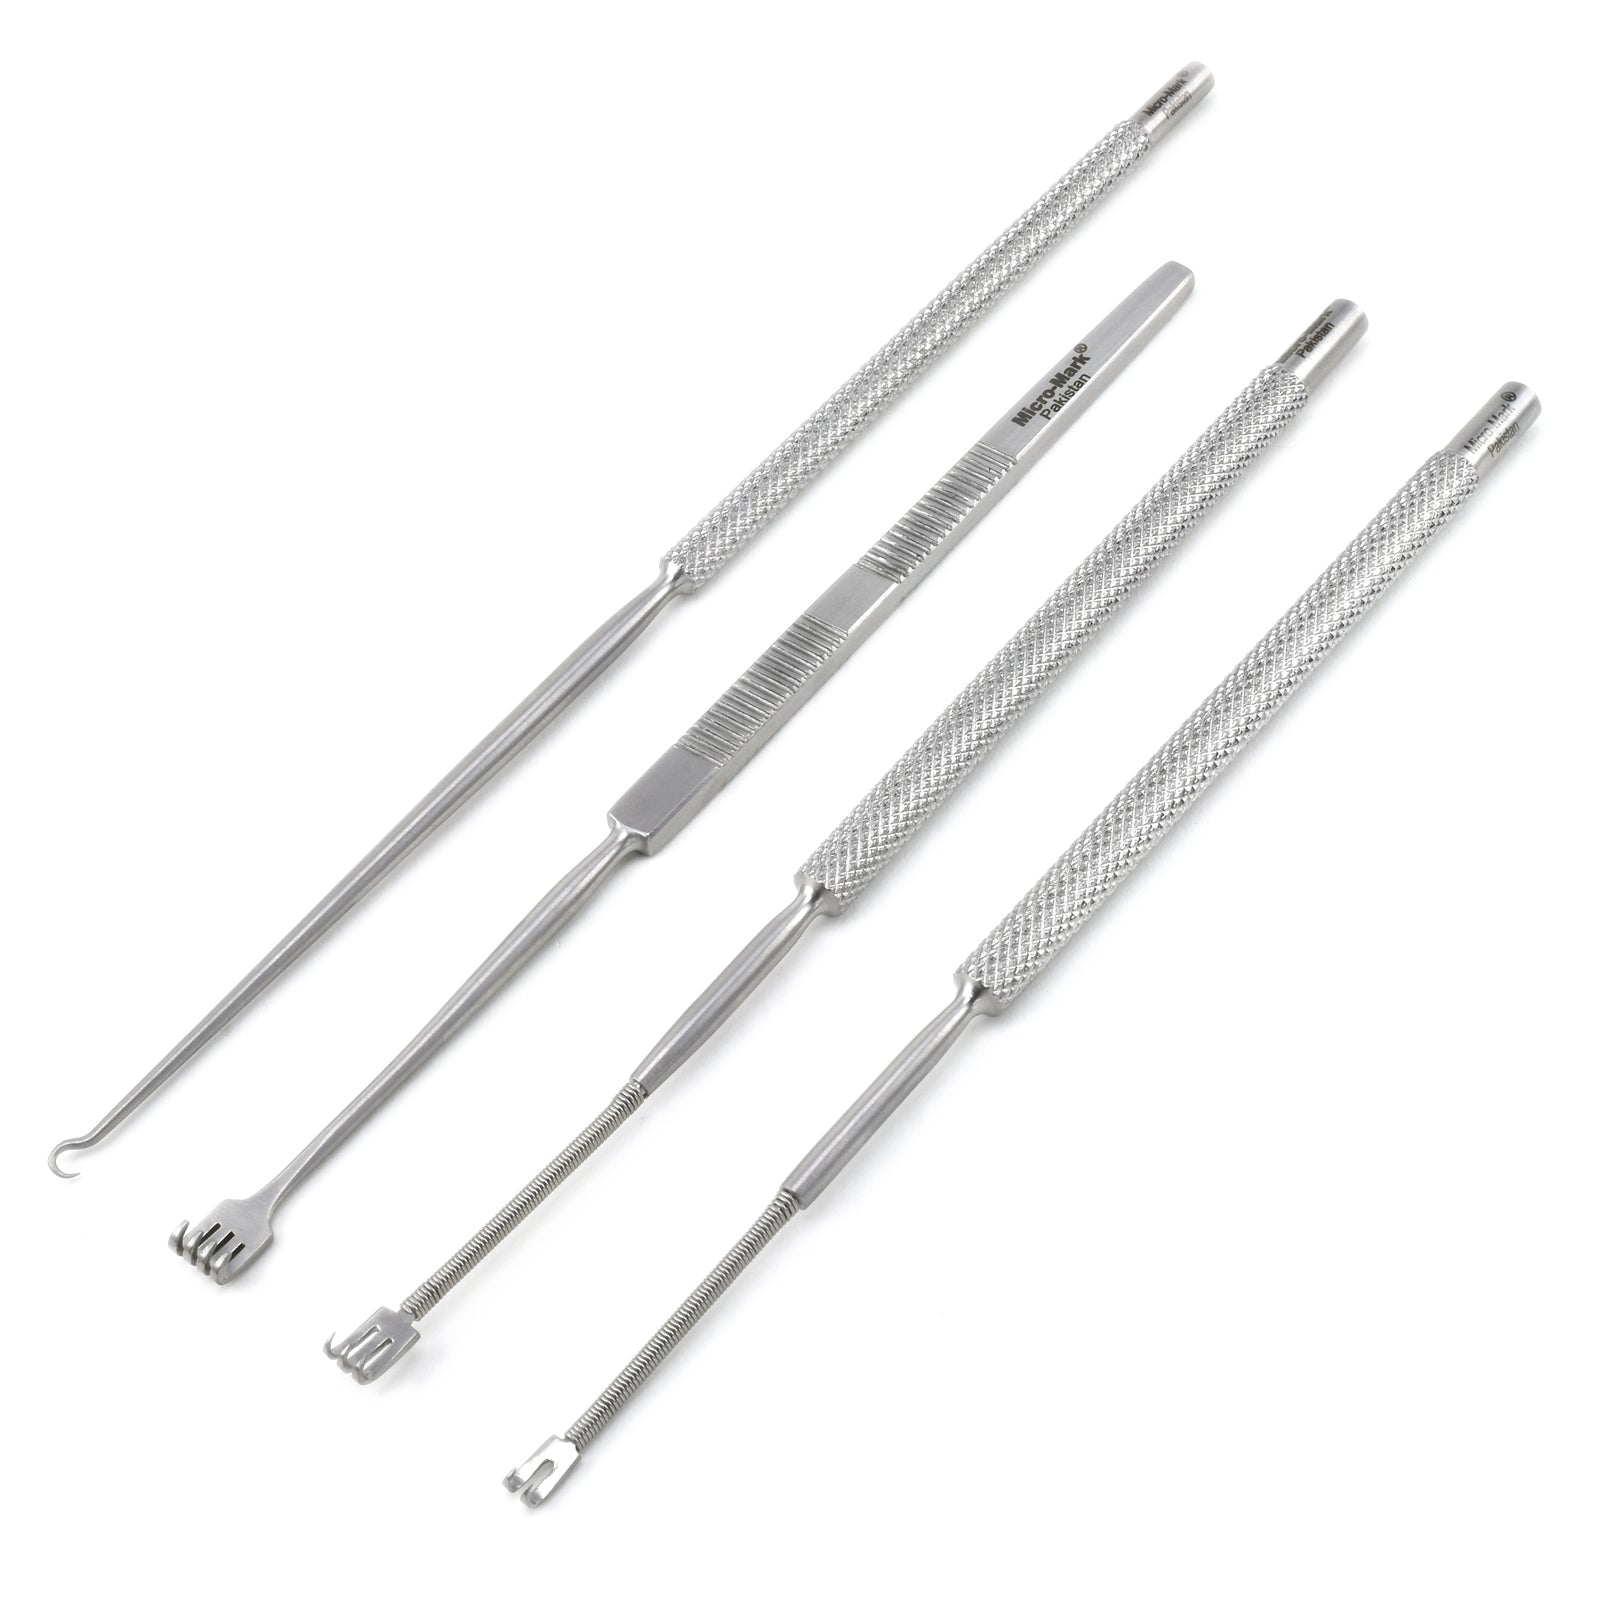 4 - piece Rigging Fingers Tool Set - Micro - Mark Scale Model Accessories